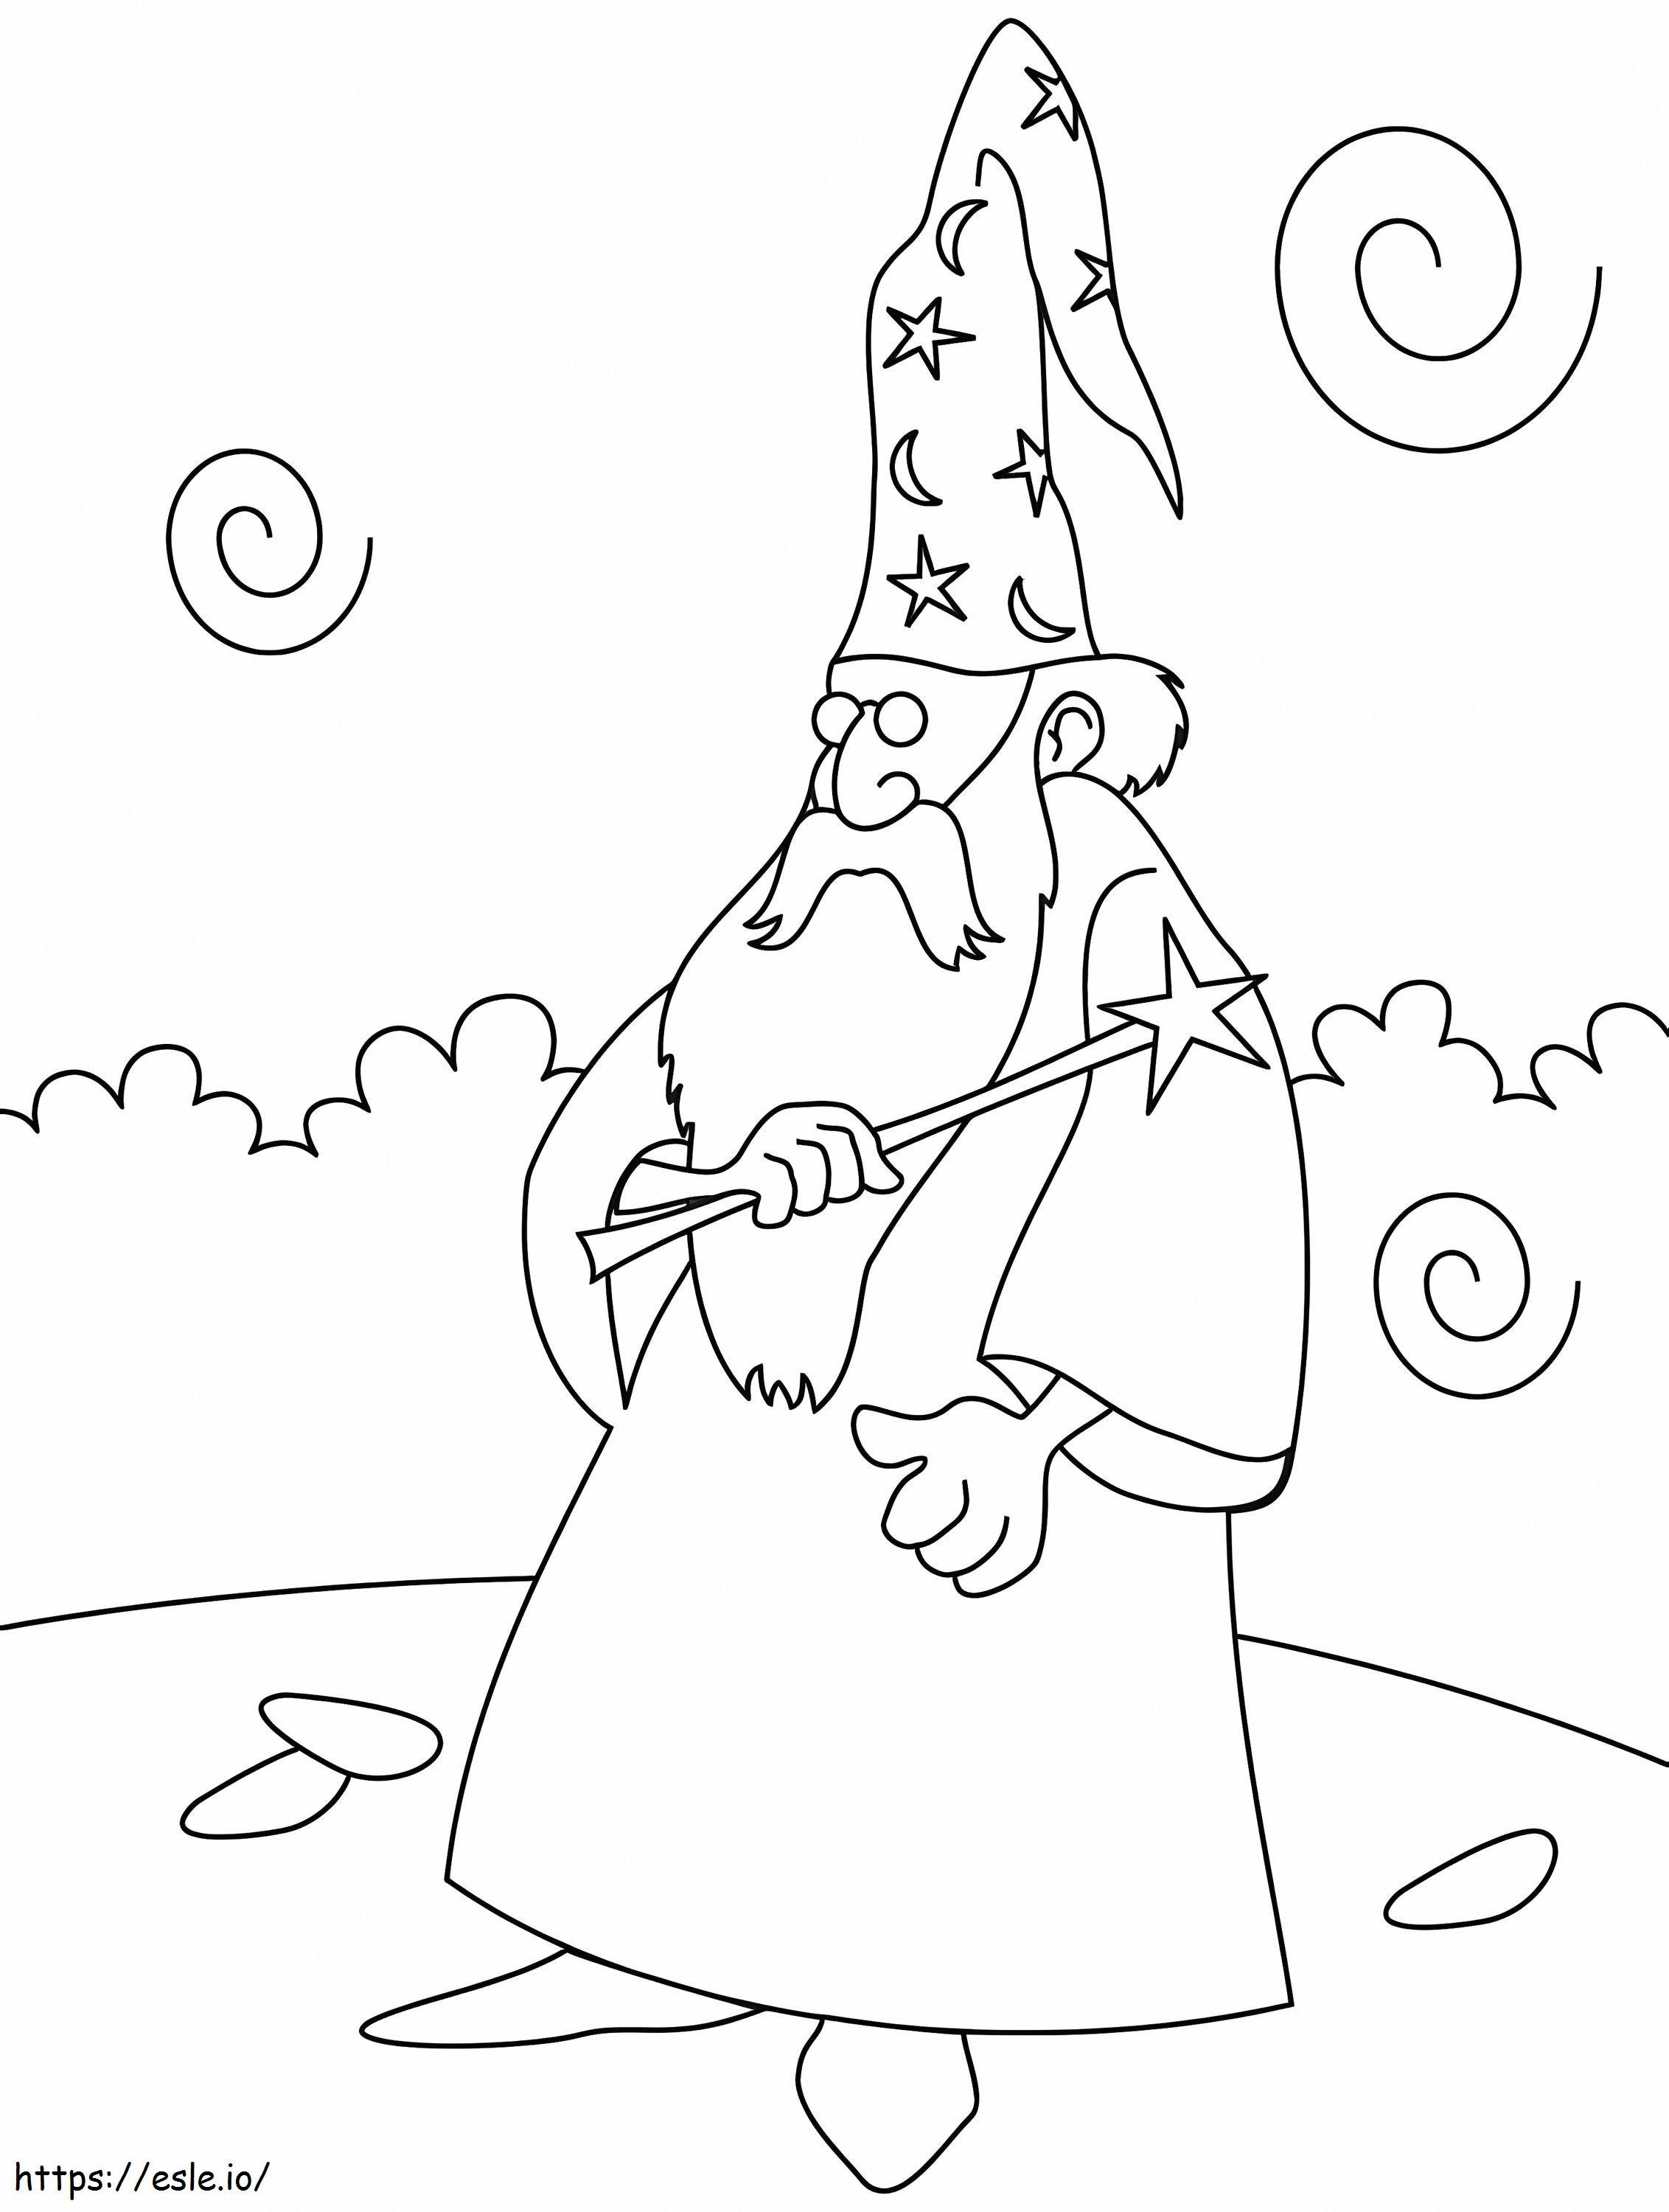 Magic Wizard coloring page